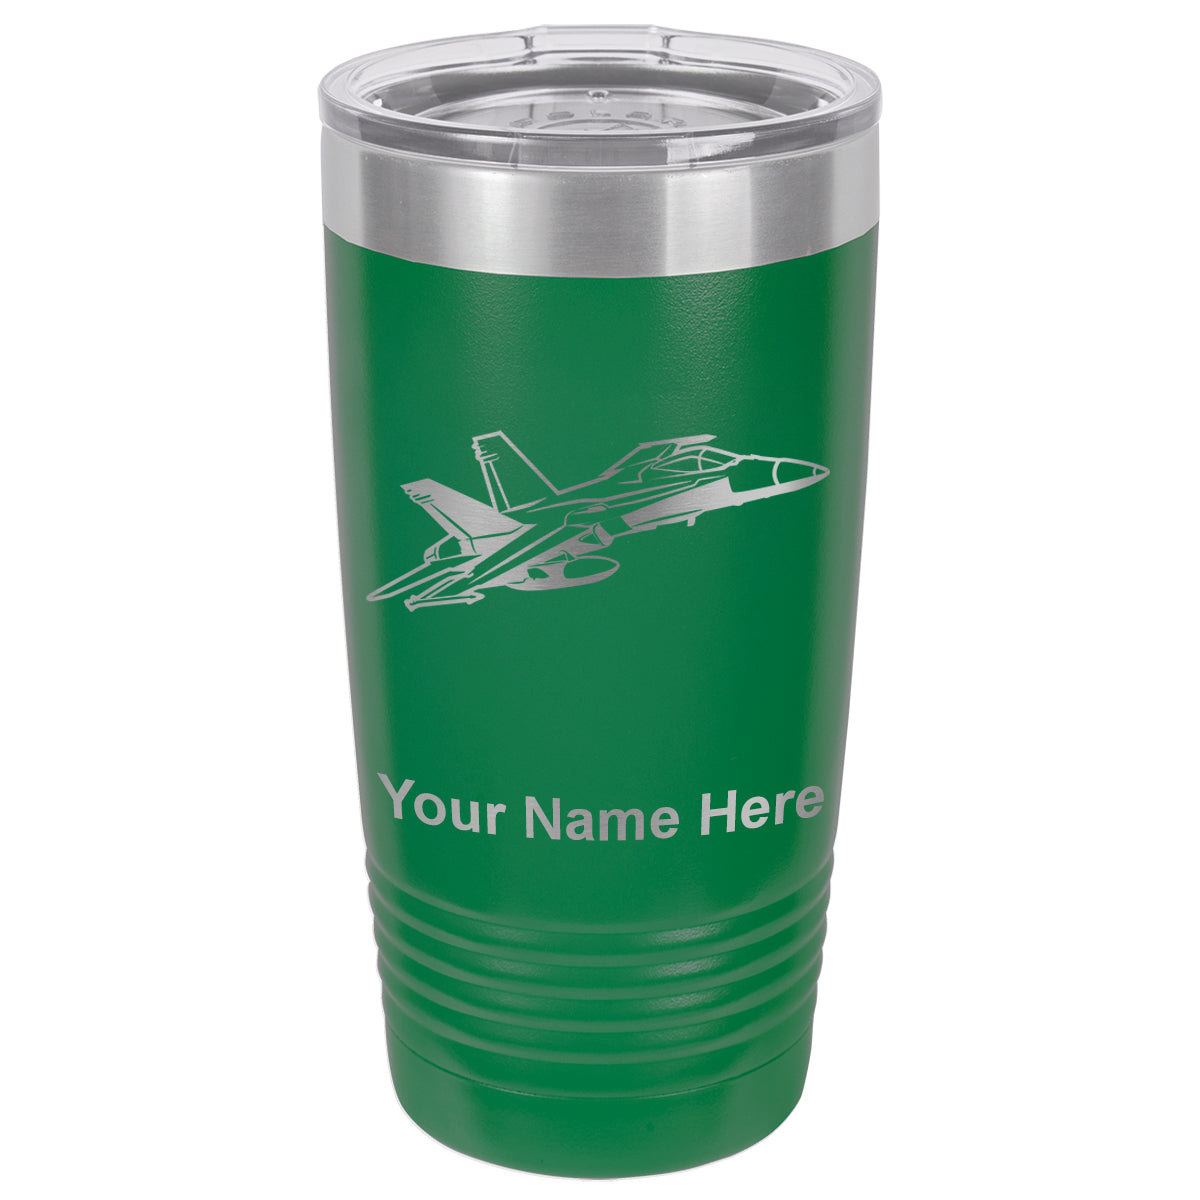 20oz Vacuum Insulated Tumbler Mug, Fighter Jet 2, Personalized Engraving Included